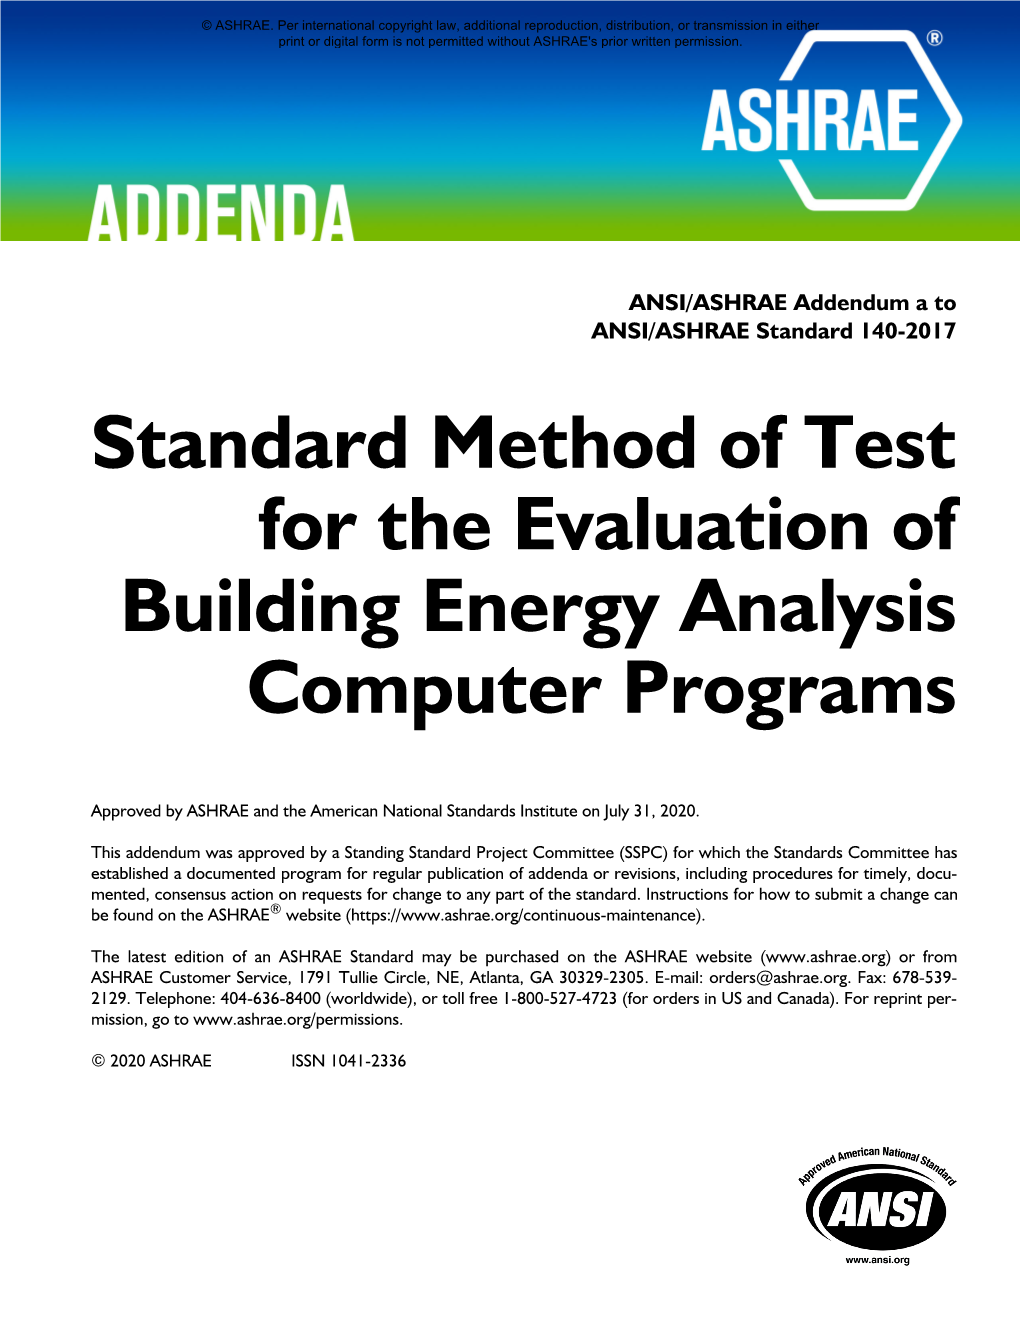 Standard Method of Test for the Evaluation of Building Energy Analysis Computer Programs